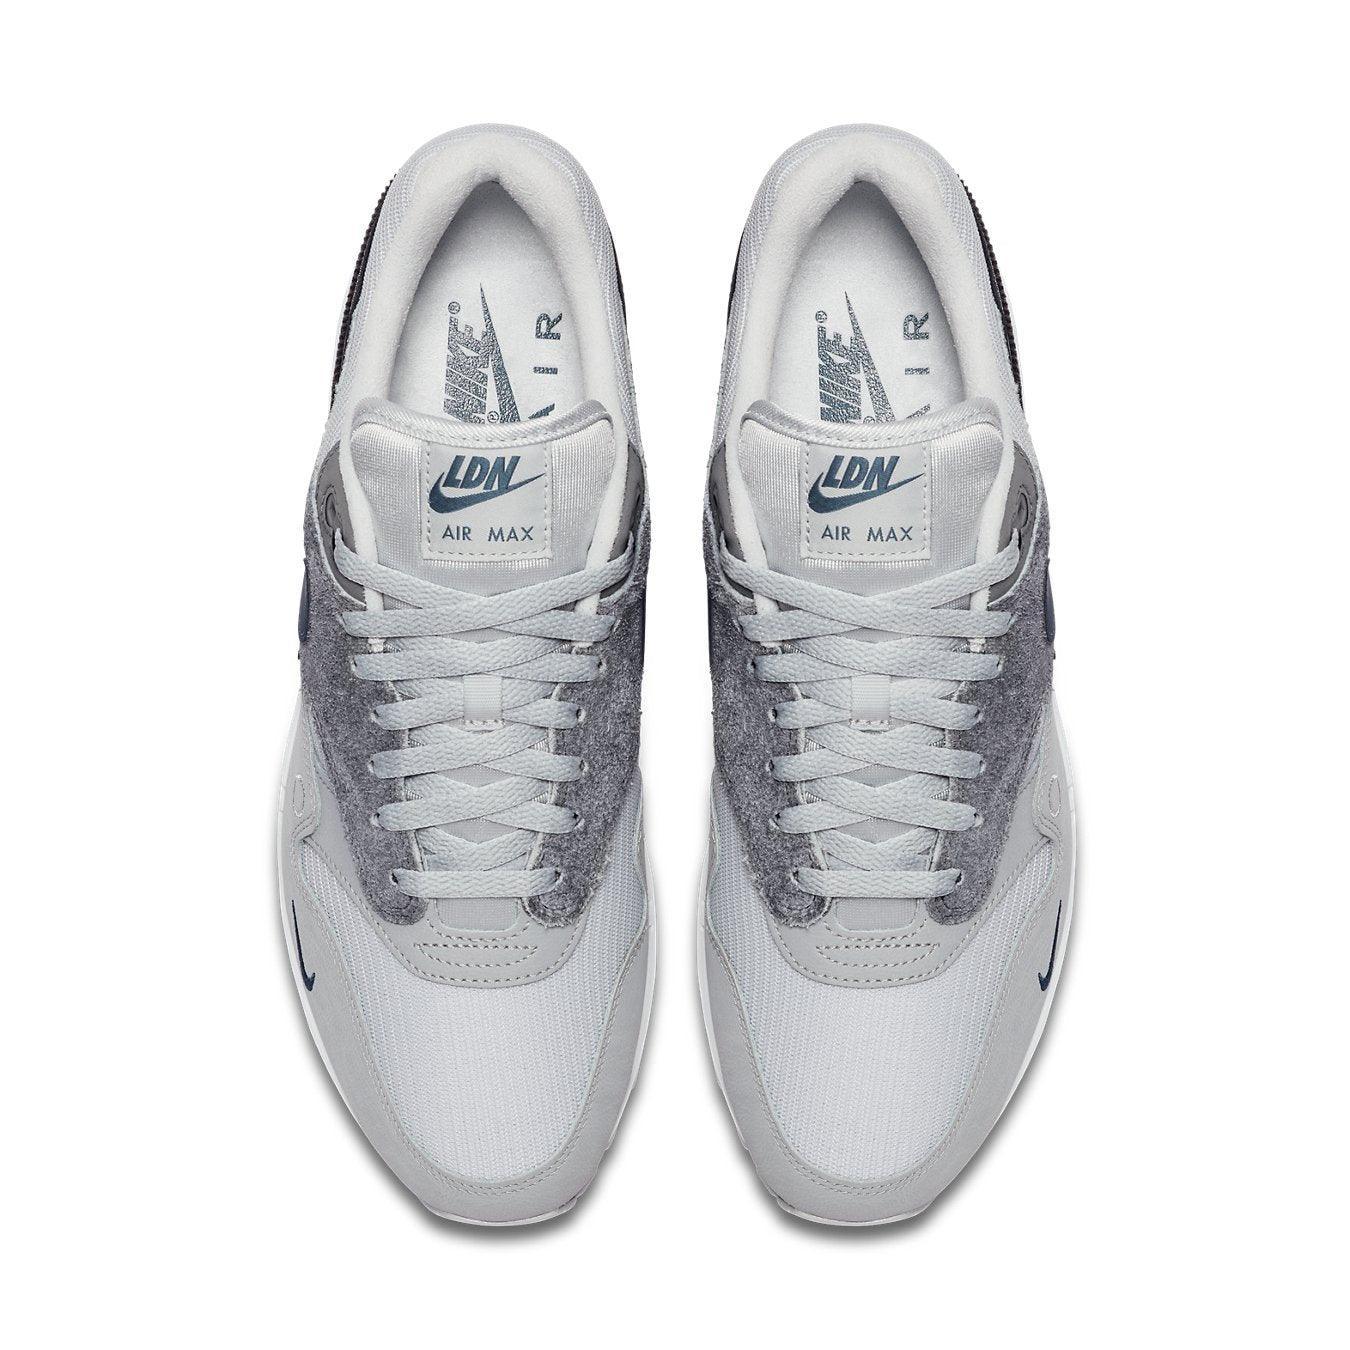 Continu speelgoed officieel Nike Air Max 1 London - CV1639-001 — dropout